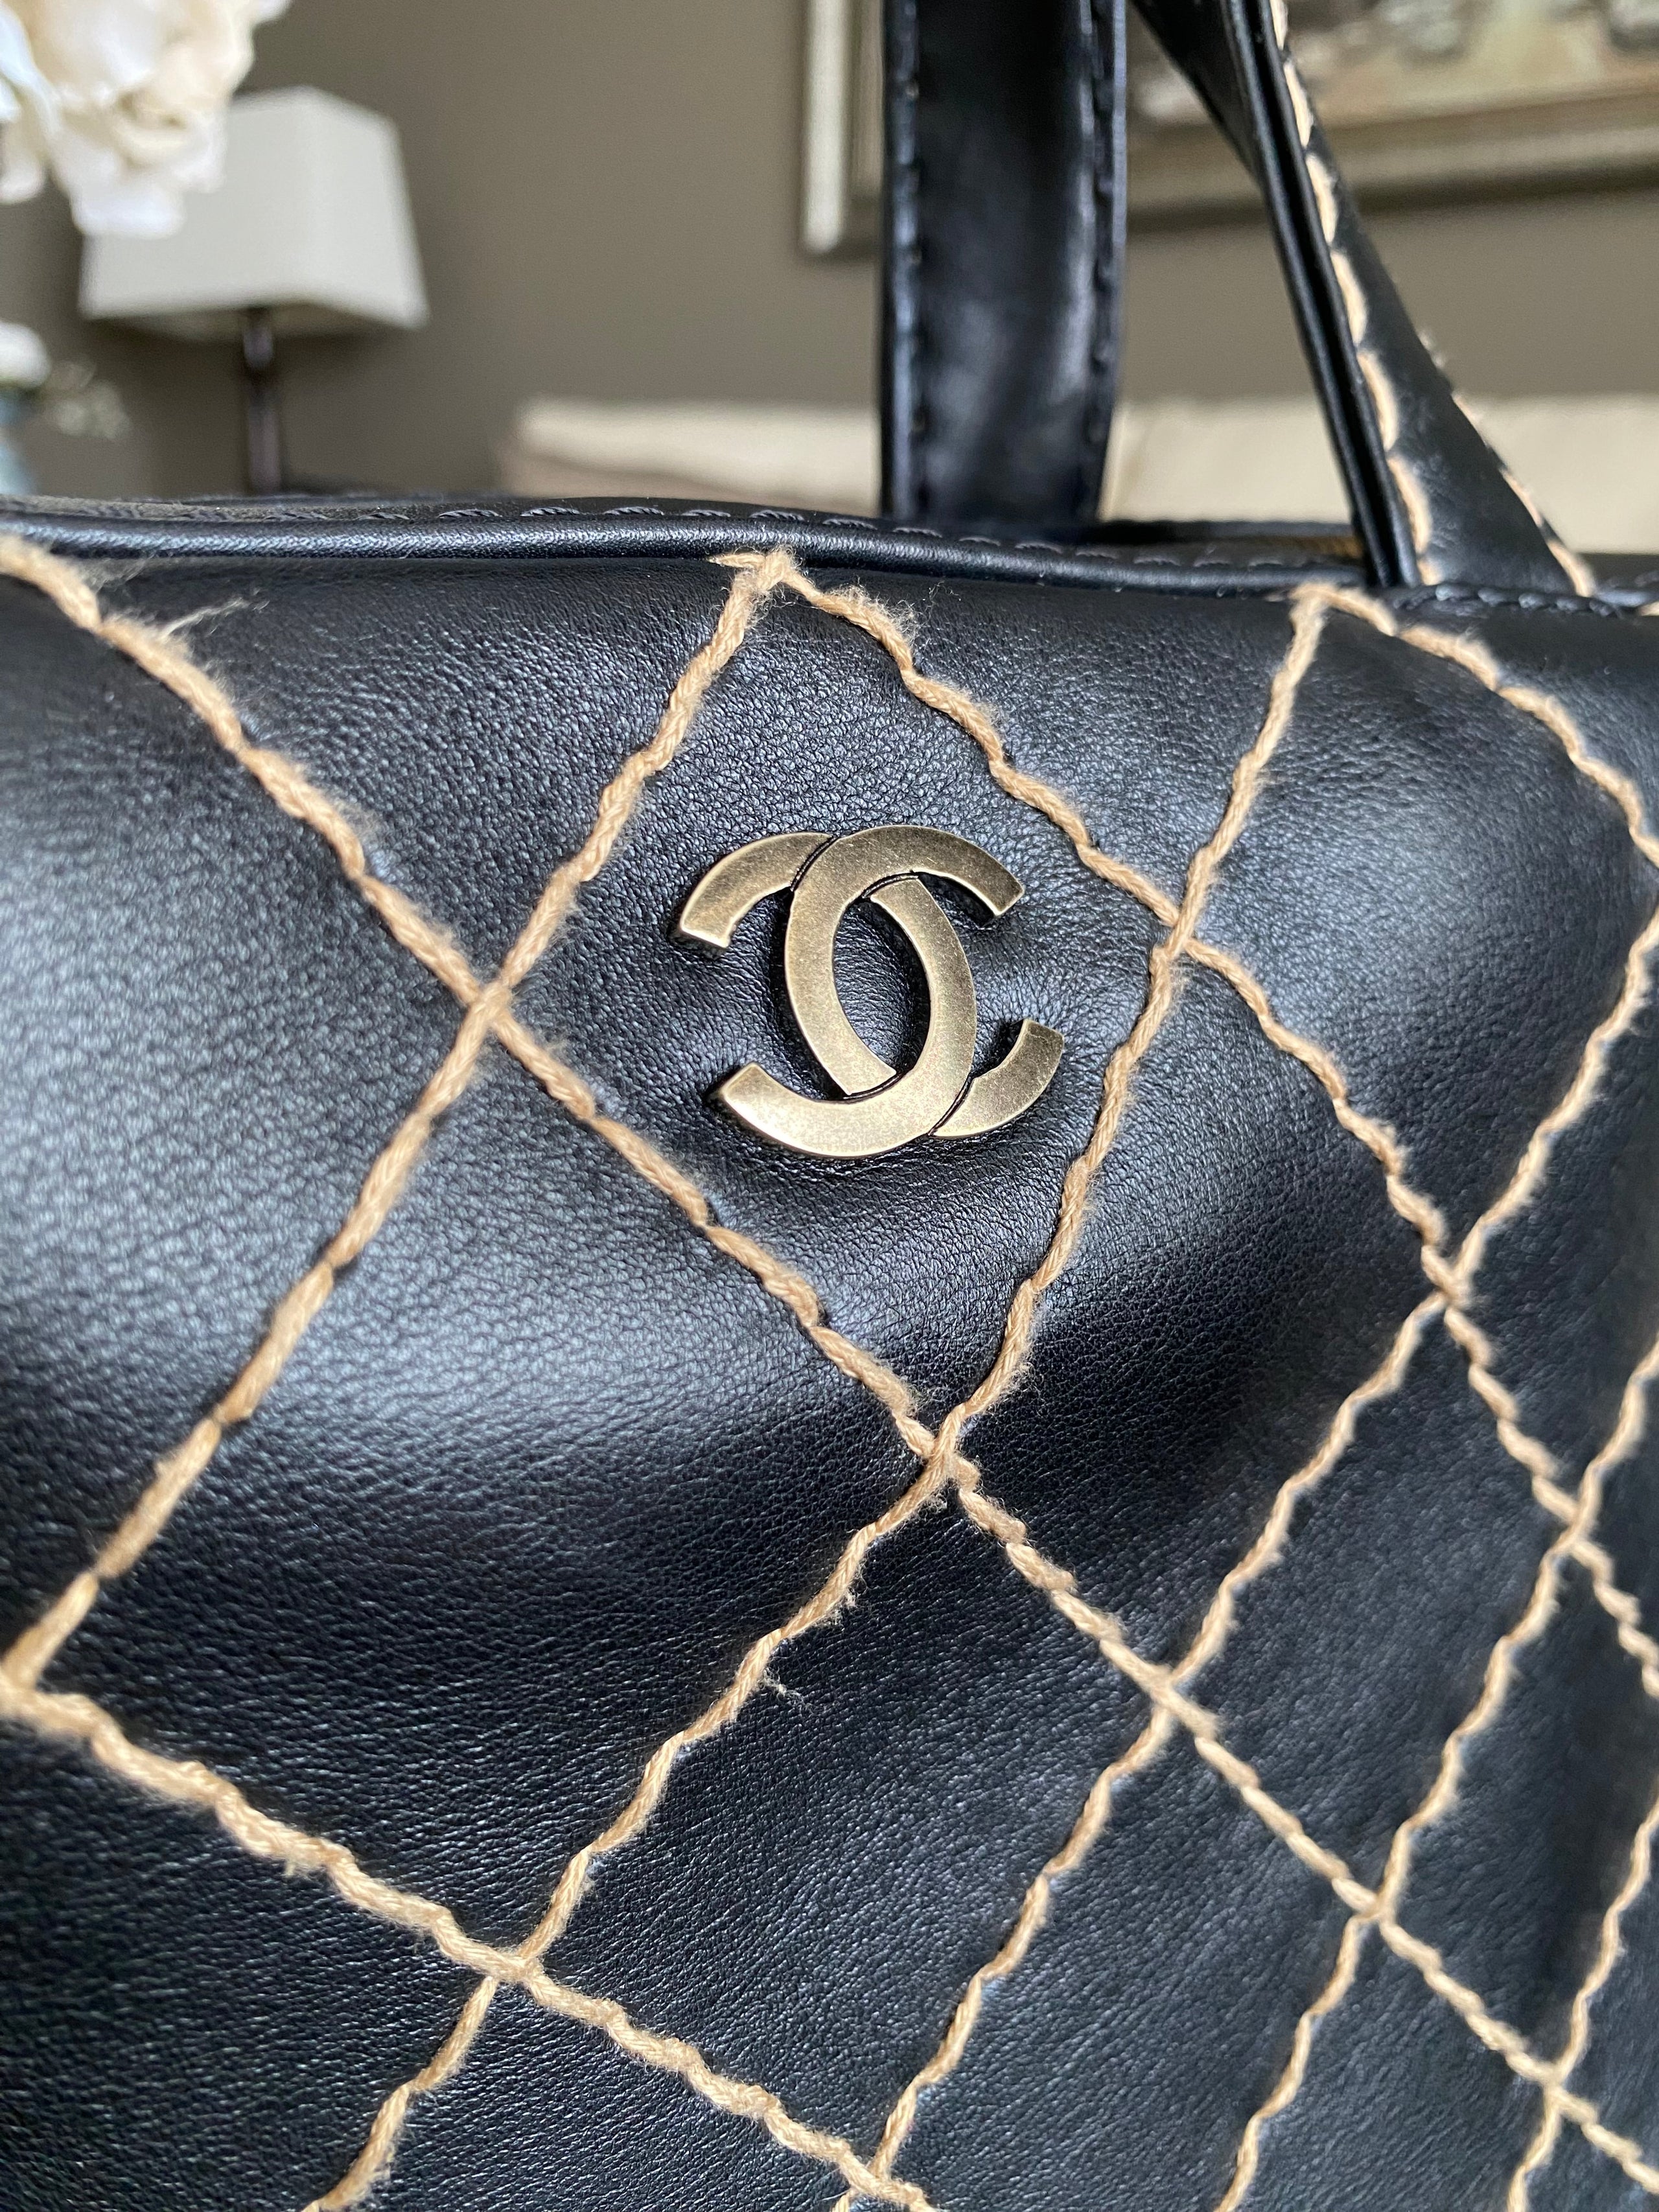 Chanel Lax White Square Quilted Leather Bowler Bag